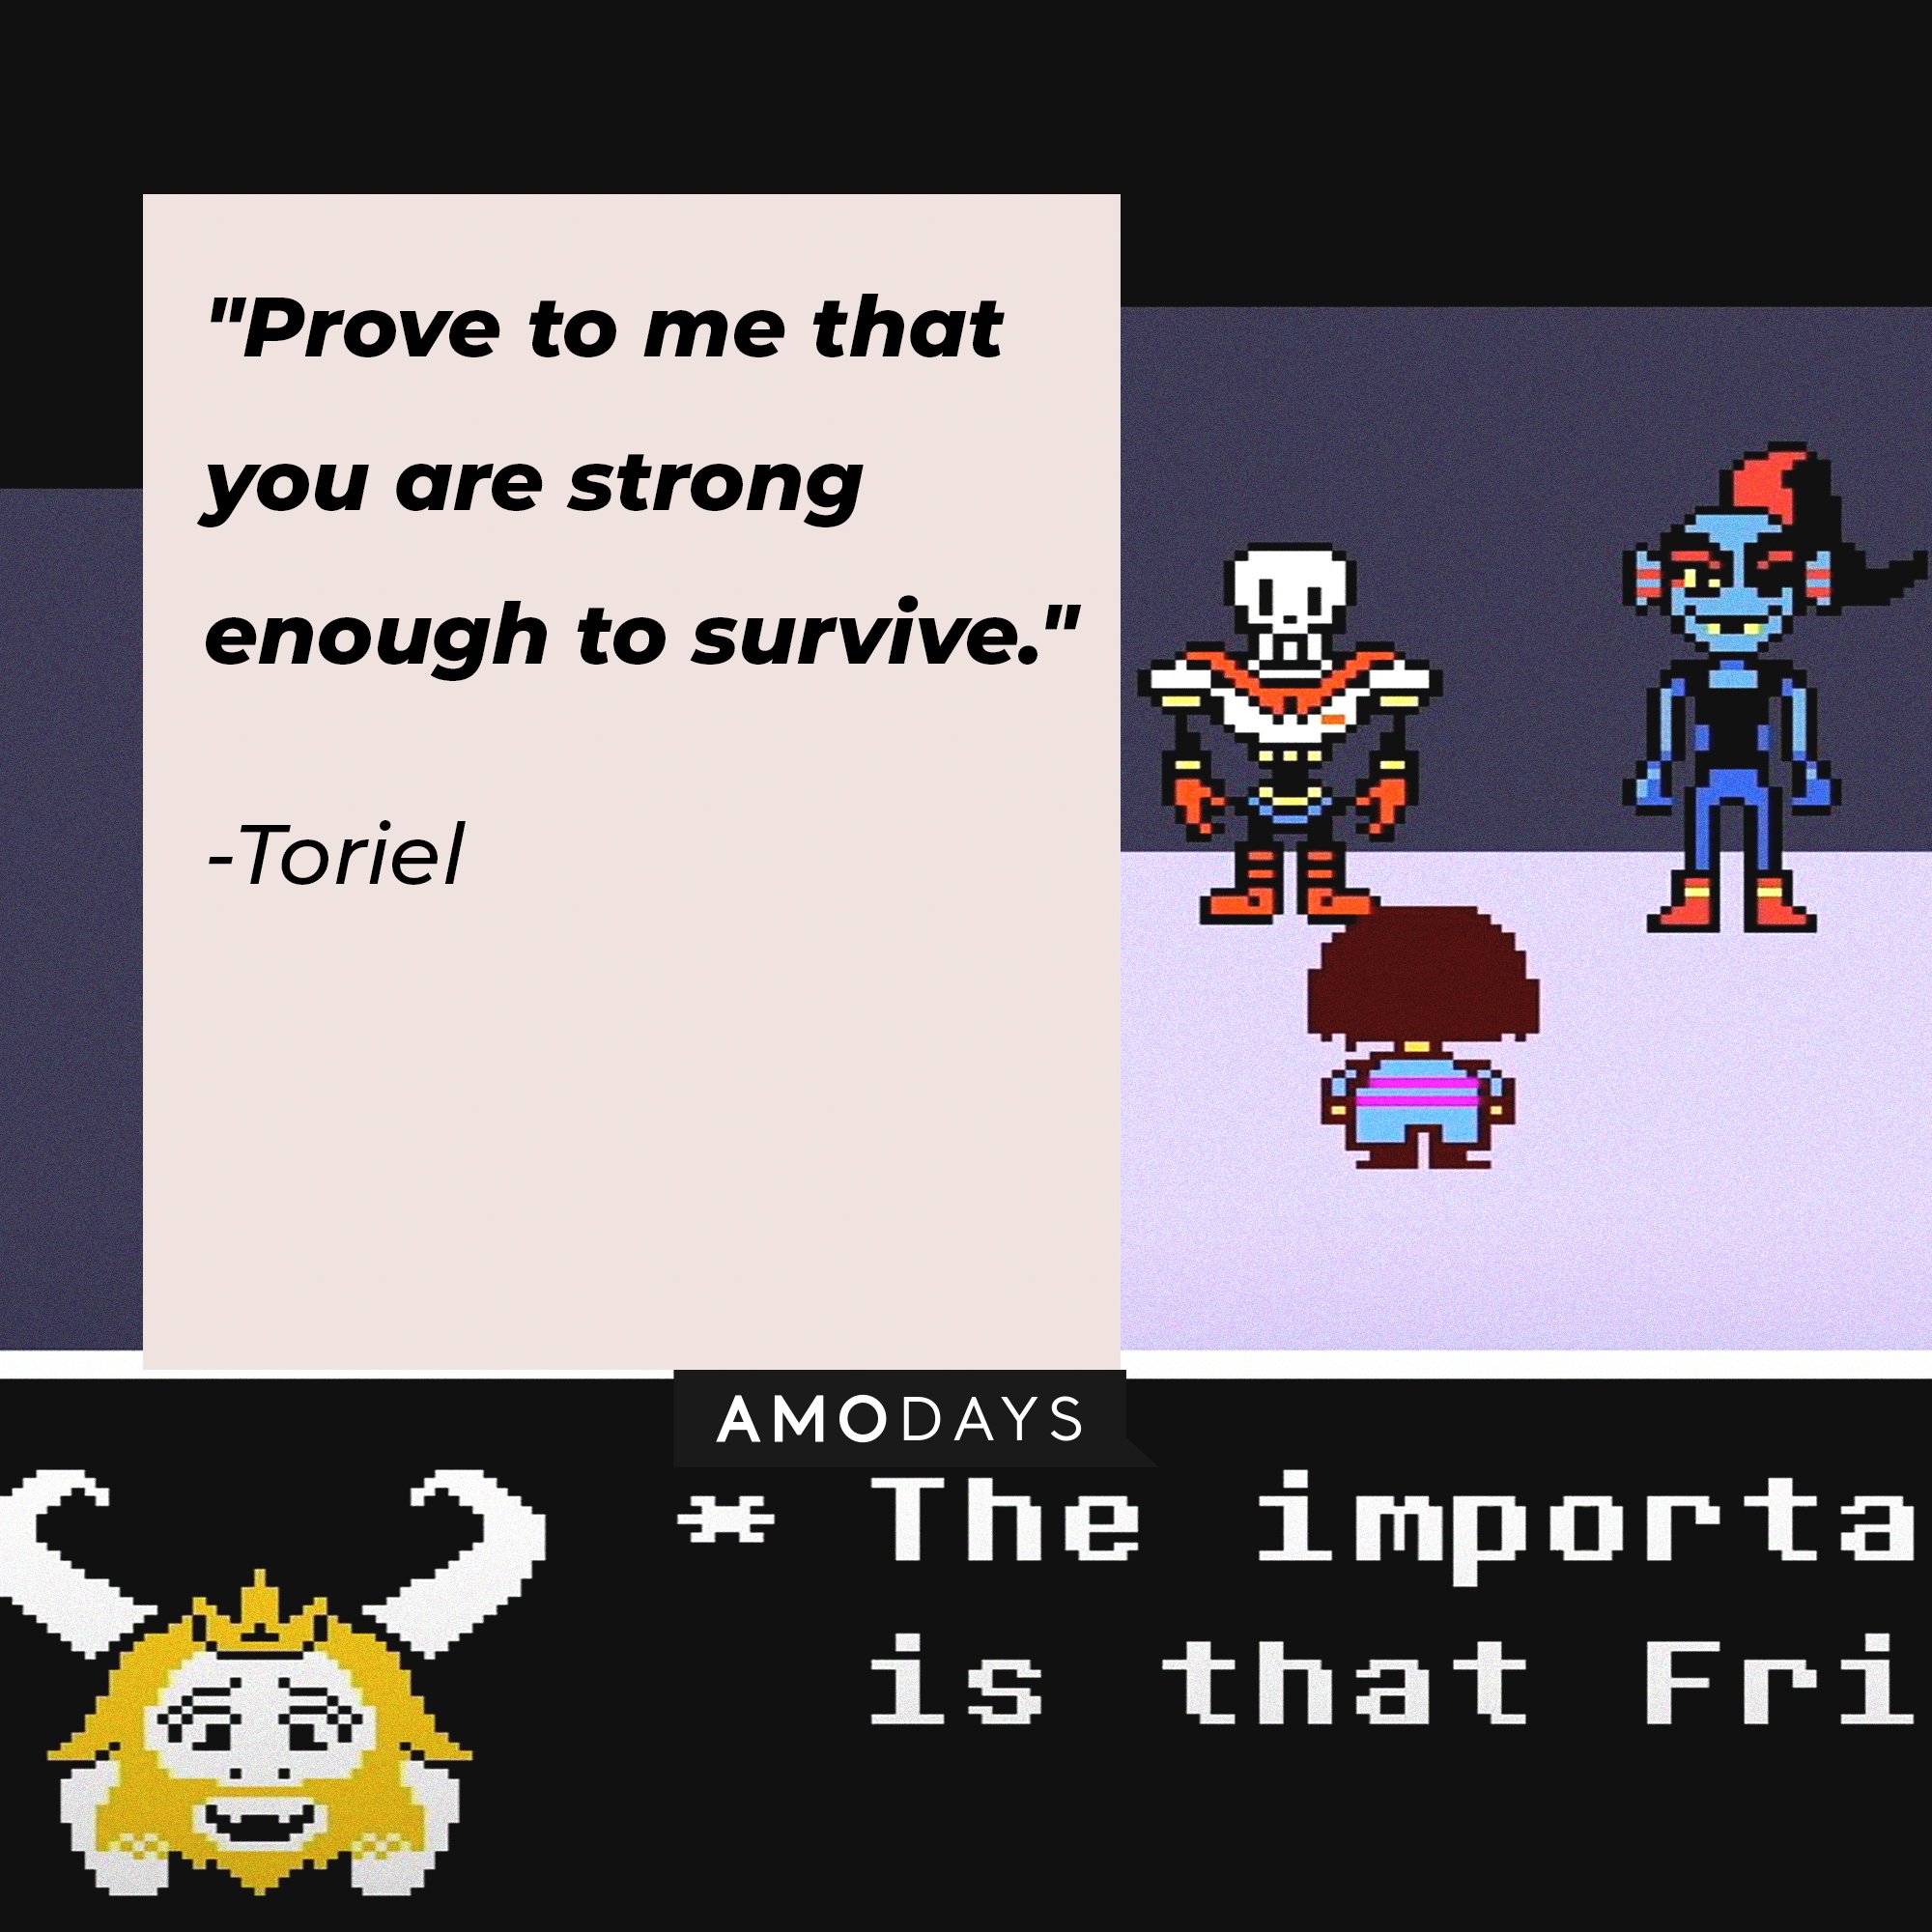 Toriel’s quote: "Prove to me that you are strong enough to survive." | Image: AmoDays